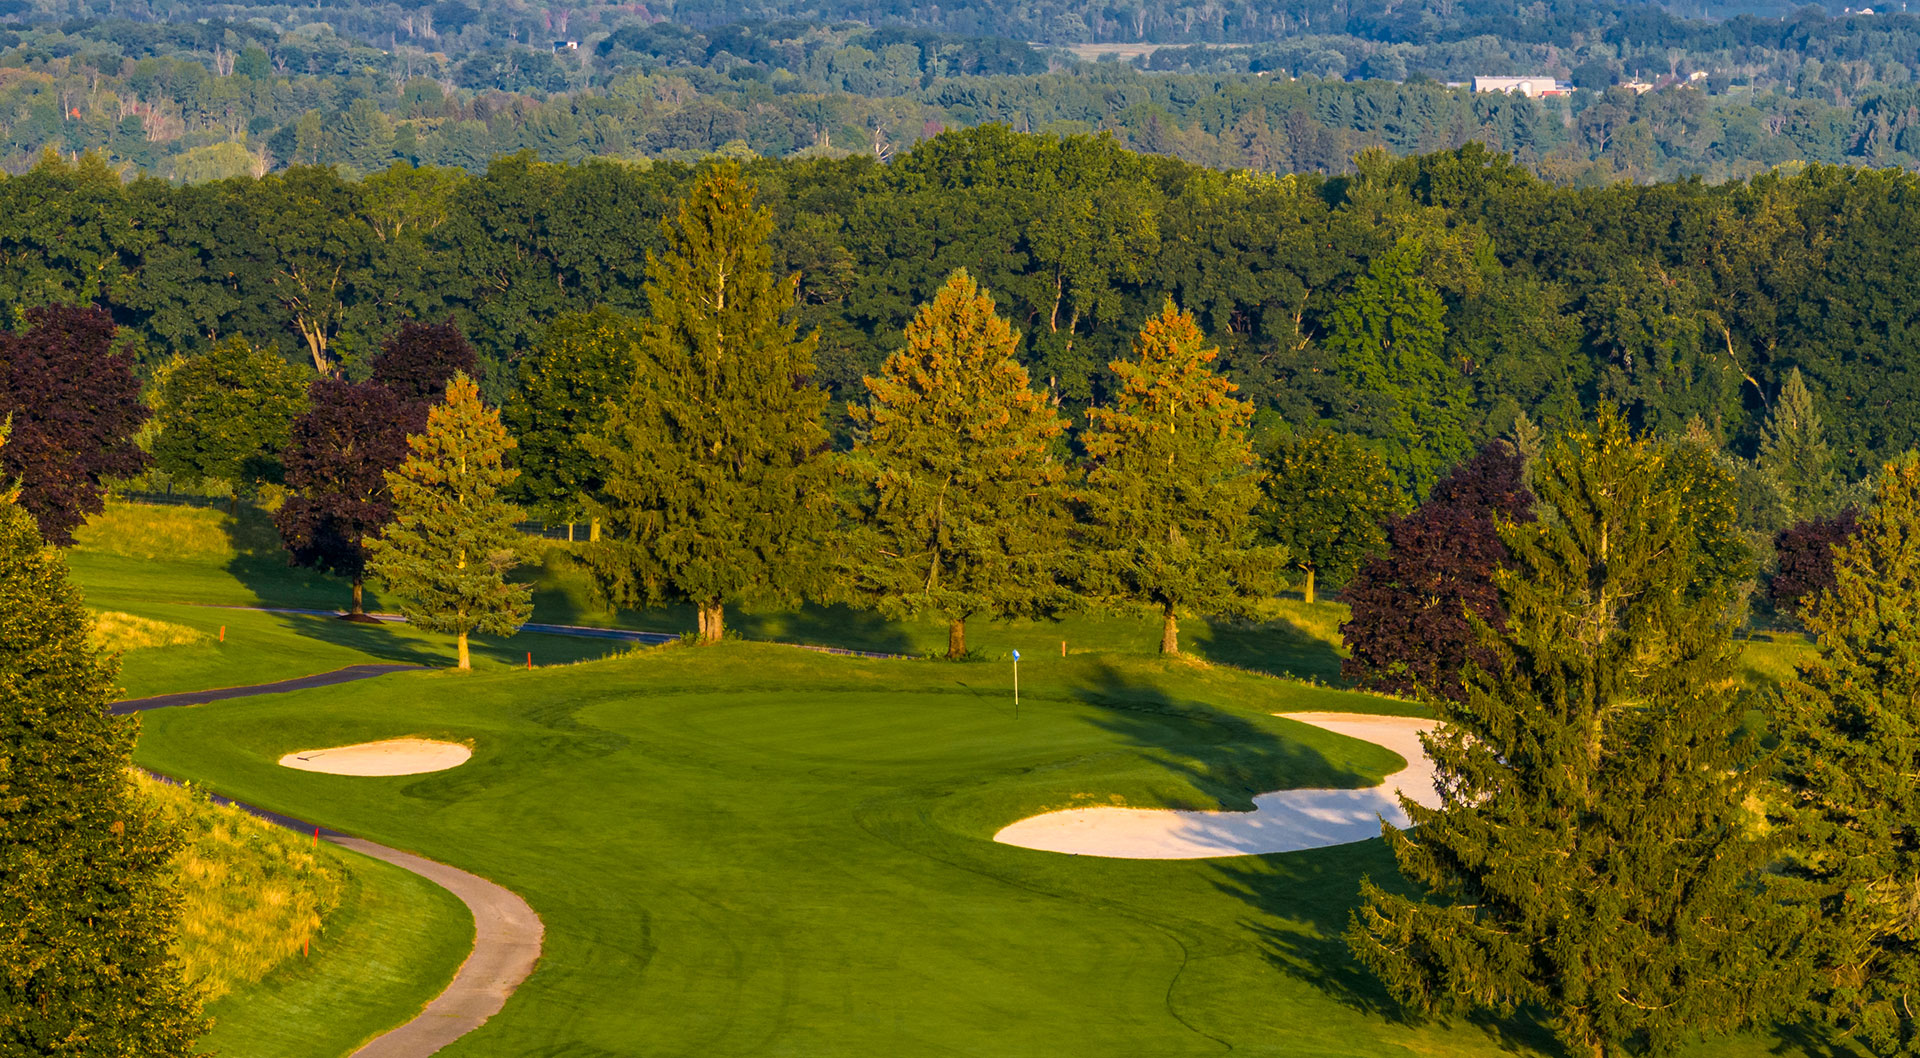 Peninsula Lakes Golf course with bunkers and tees, surrounded by lush greenery